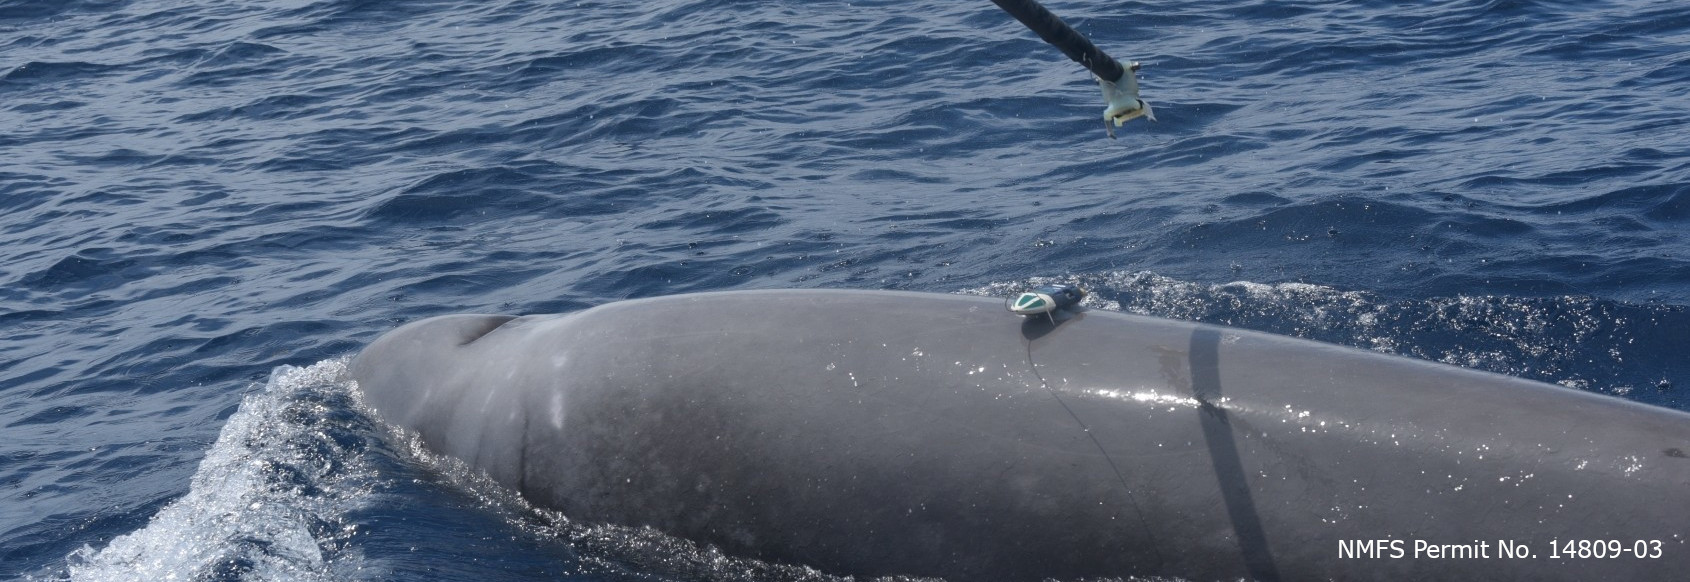 a dtag has just been applied to a Cuvier's beaked whale